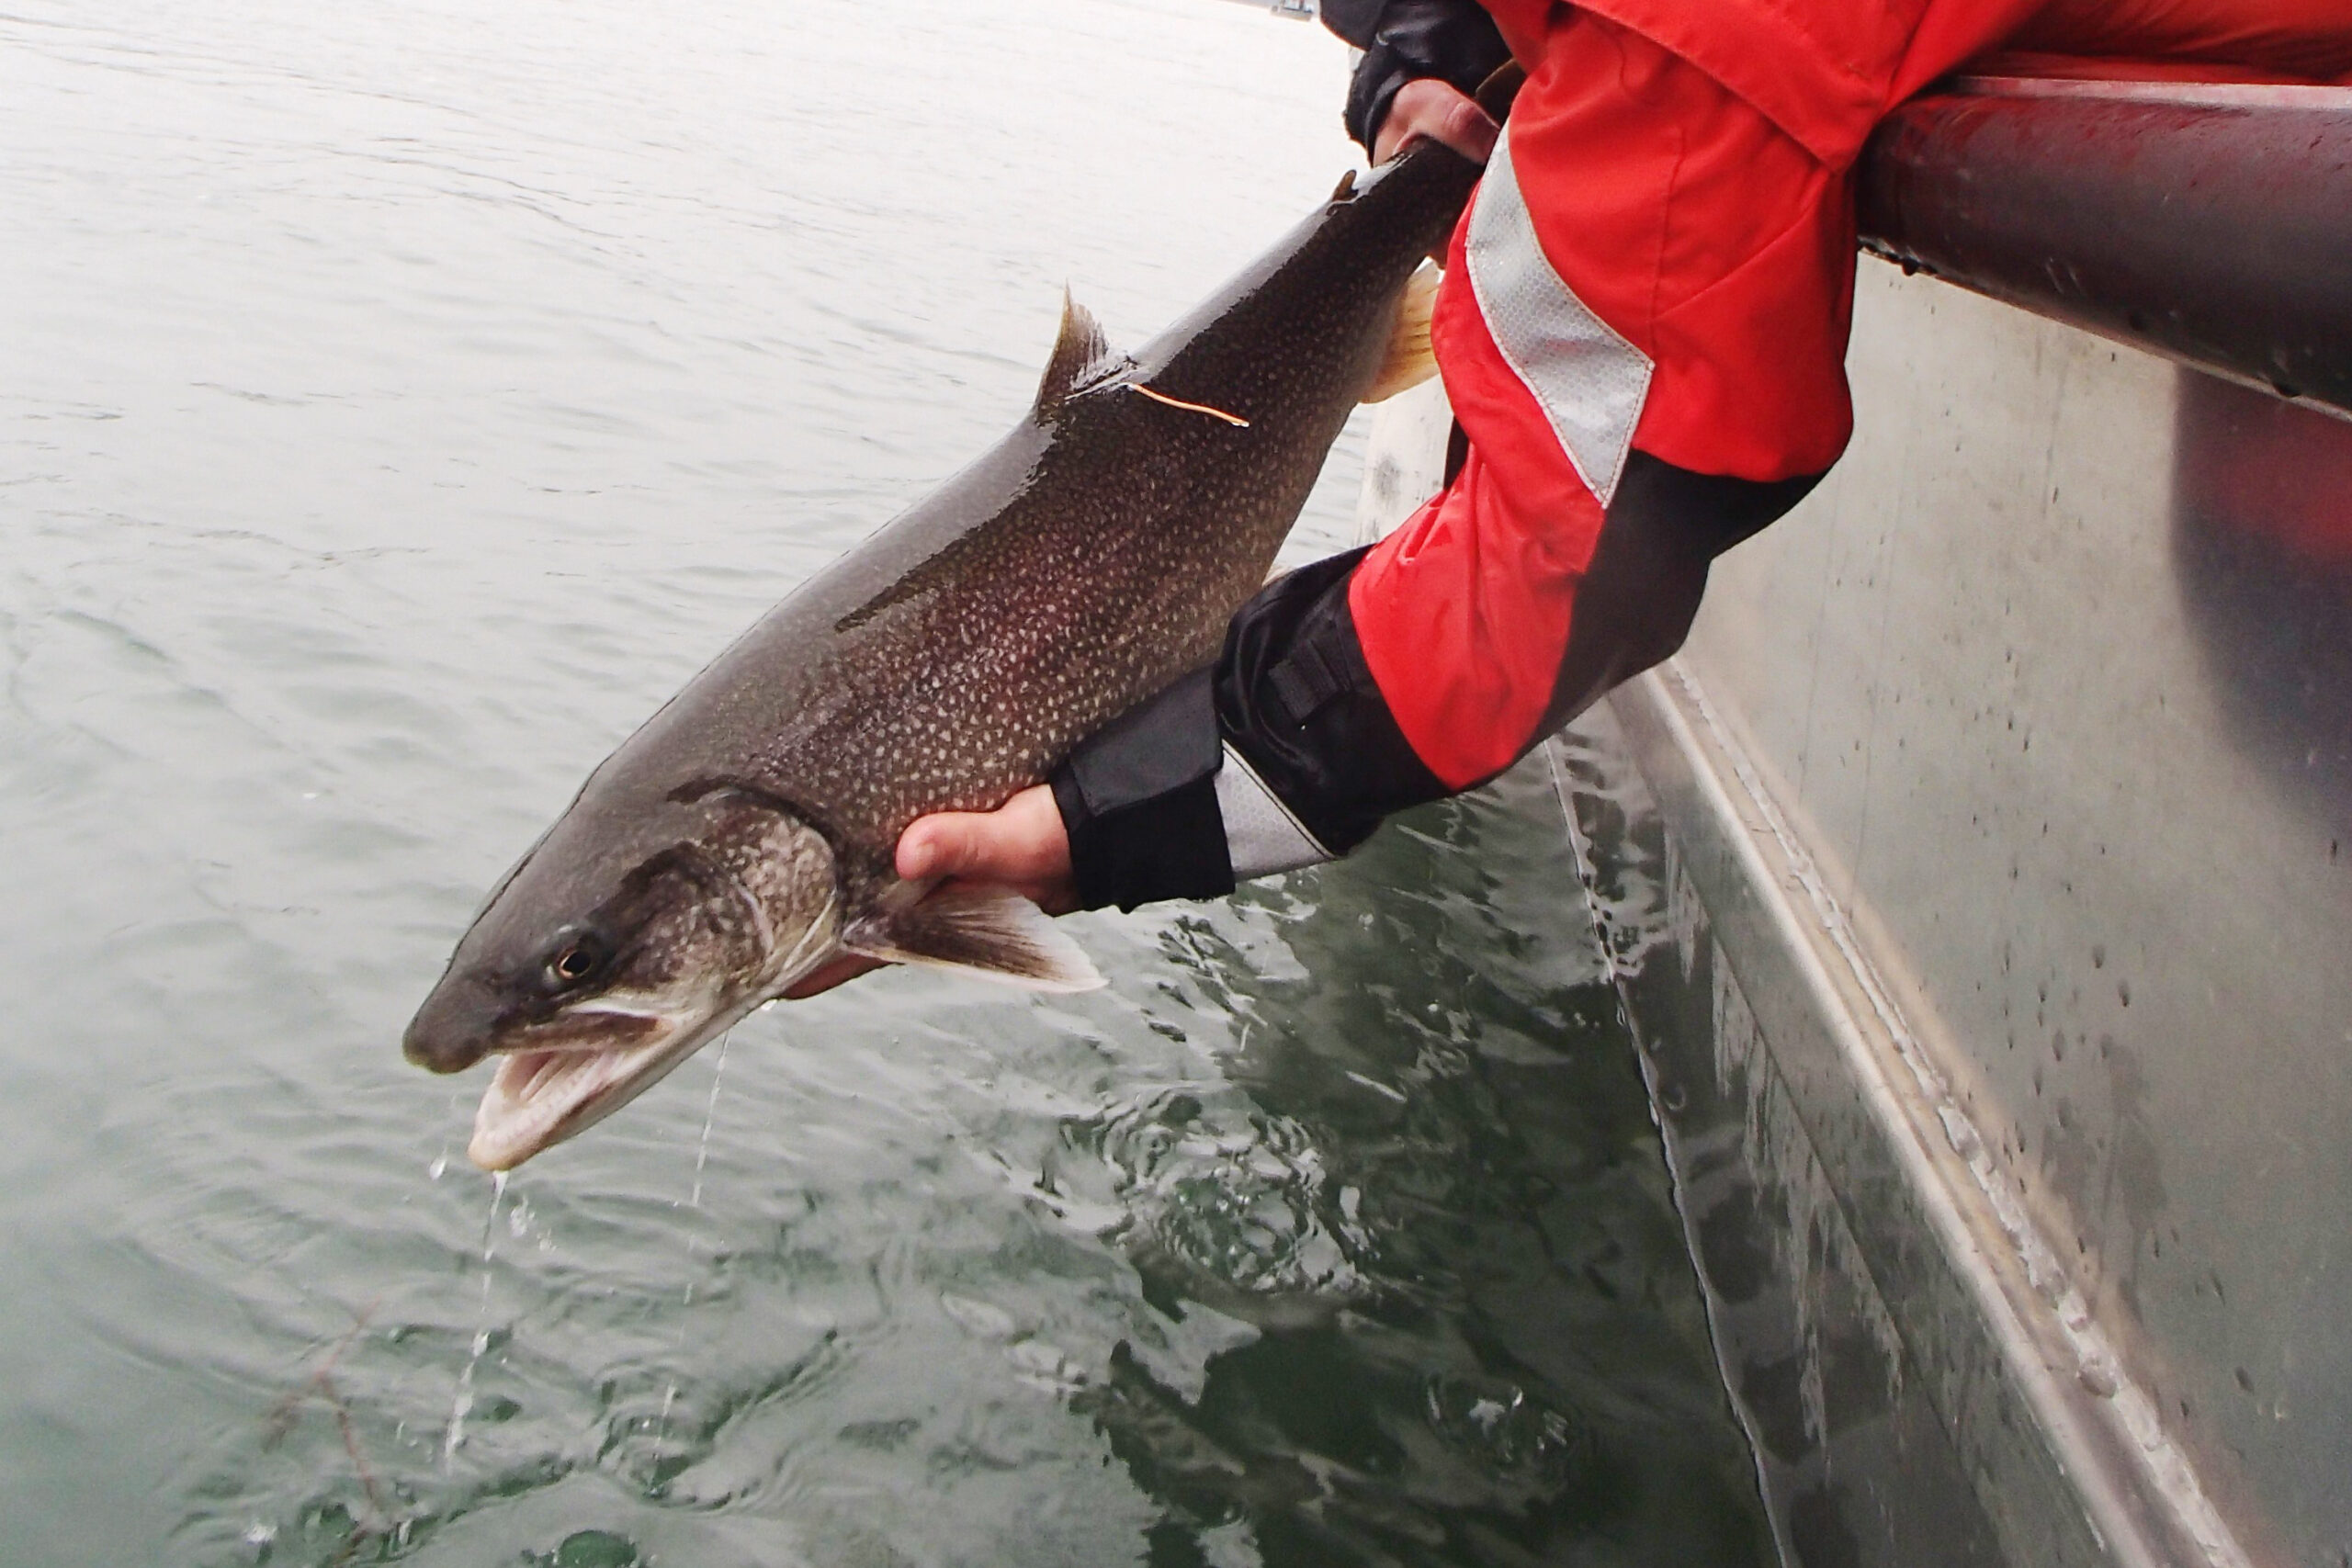 Lake trout are spawning in 300 feet of water.